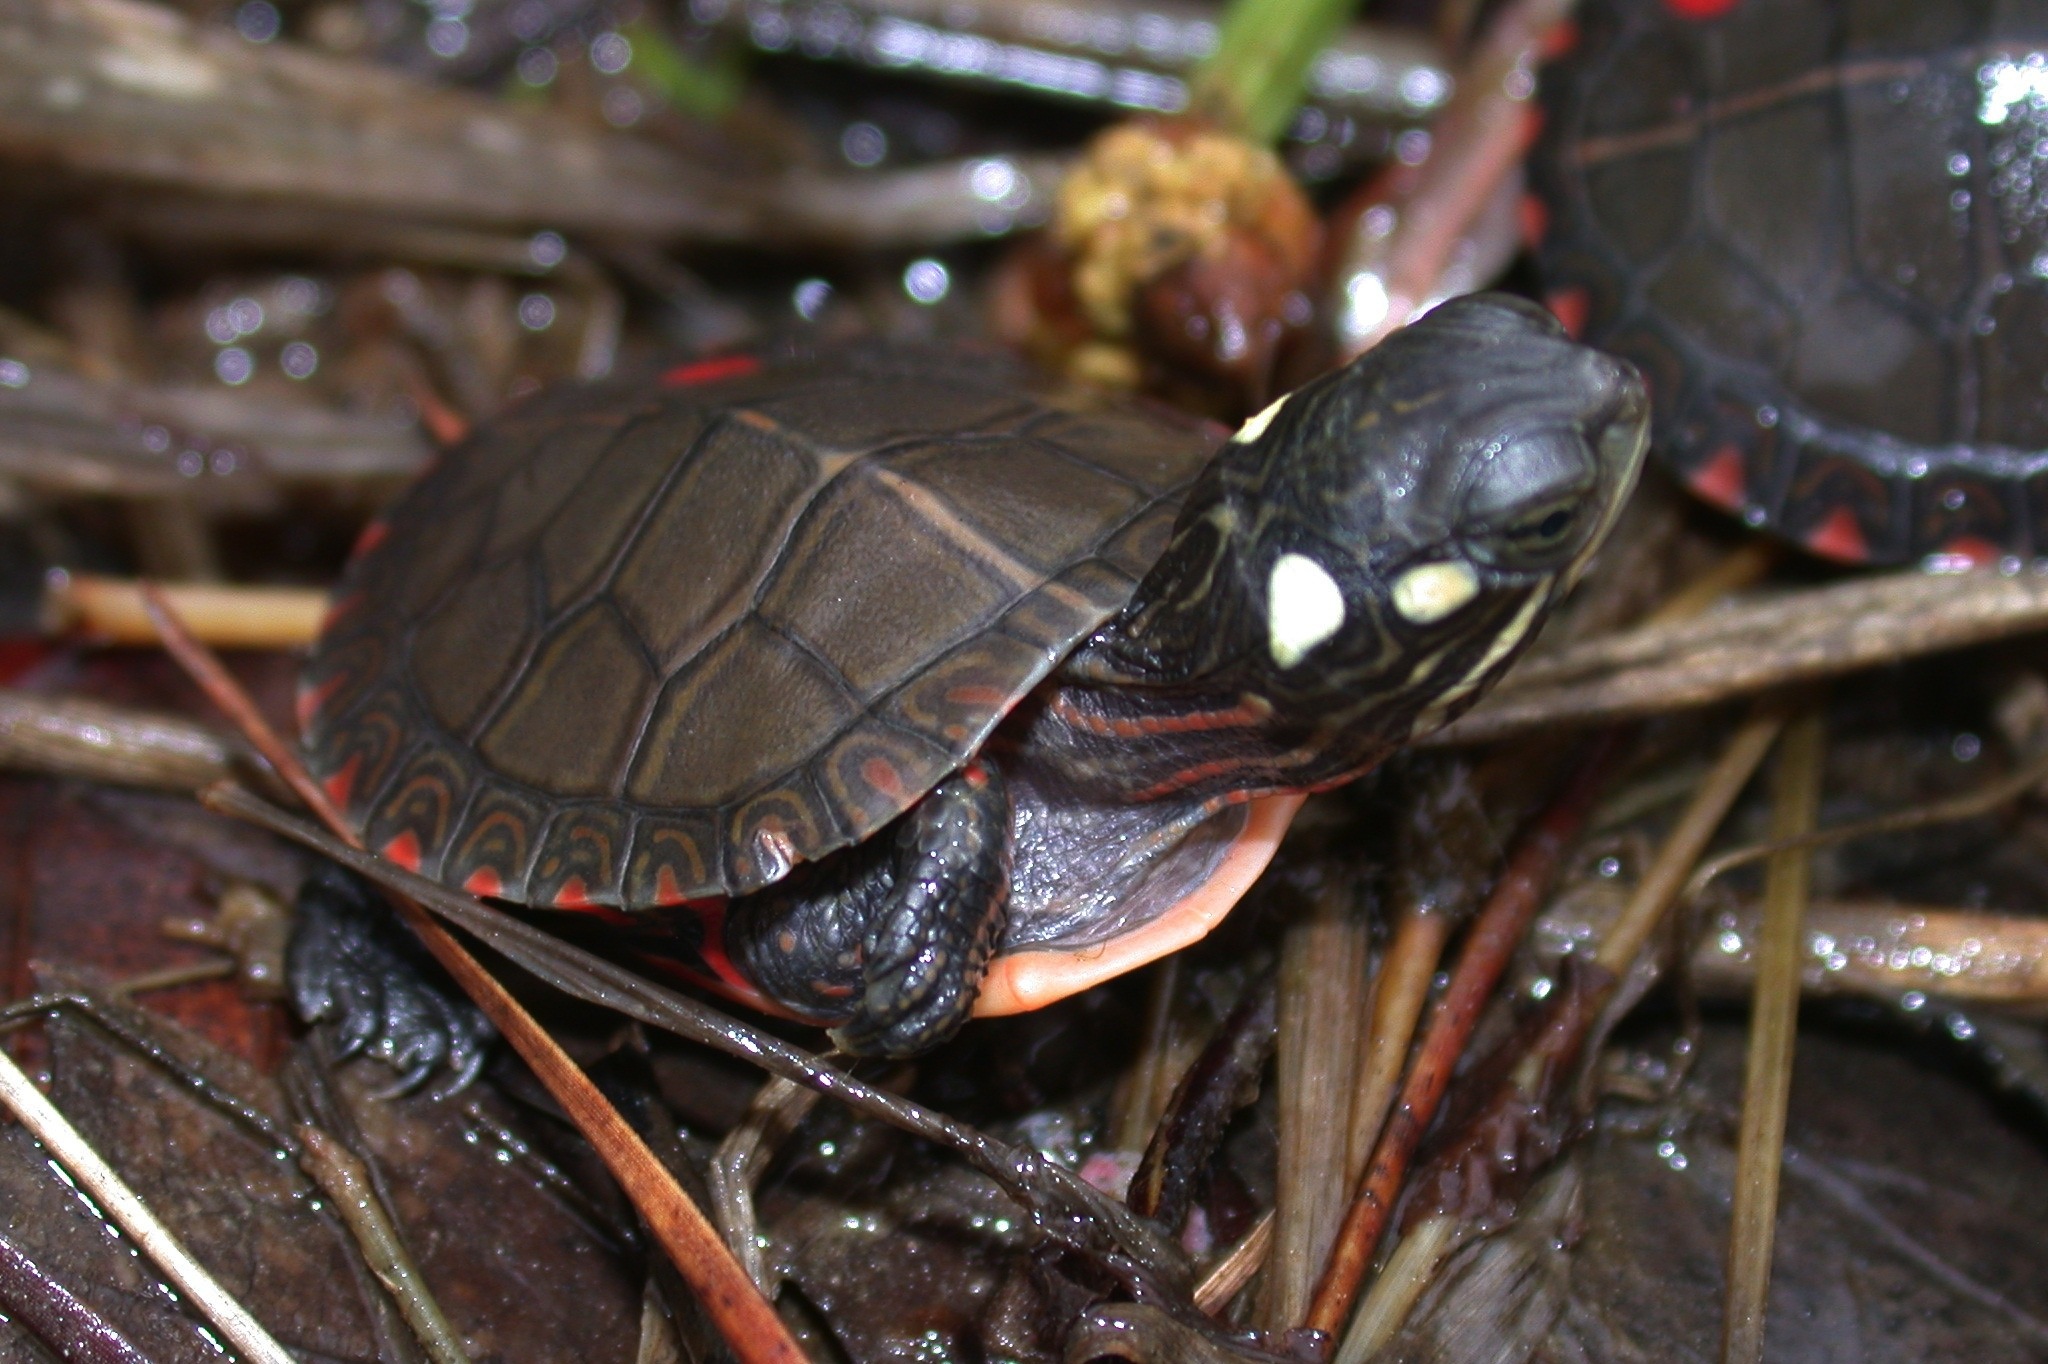 Painted turtle hatchling Photo by JD Willson